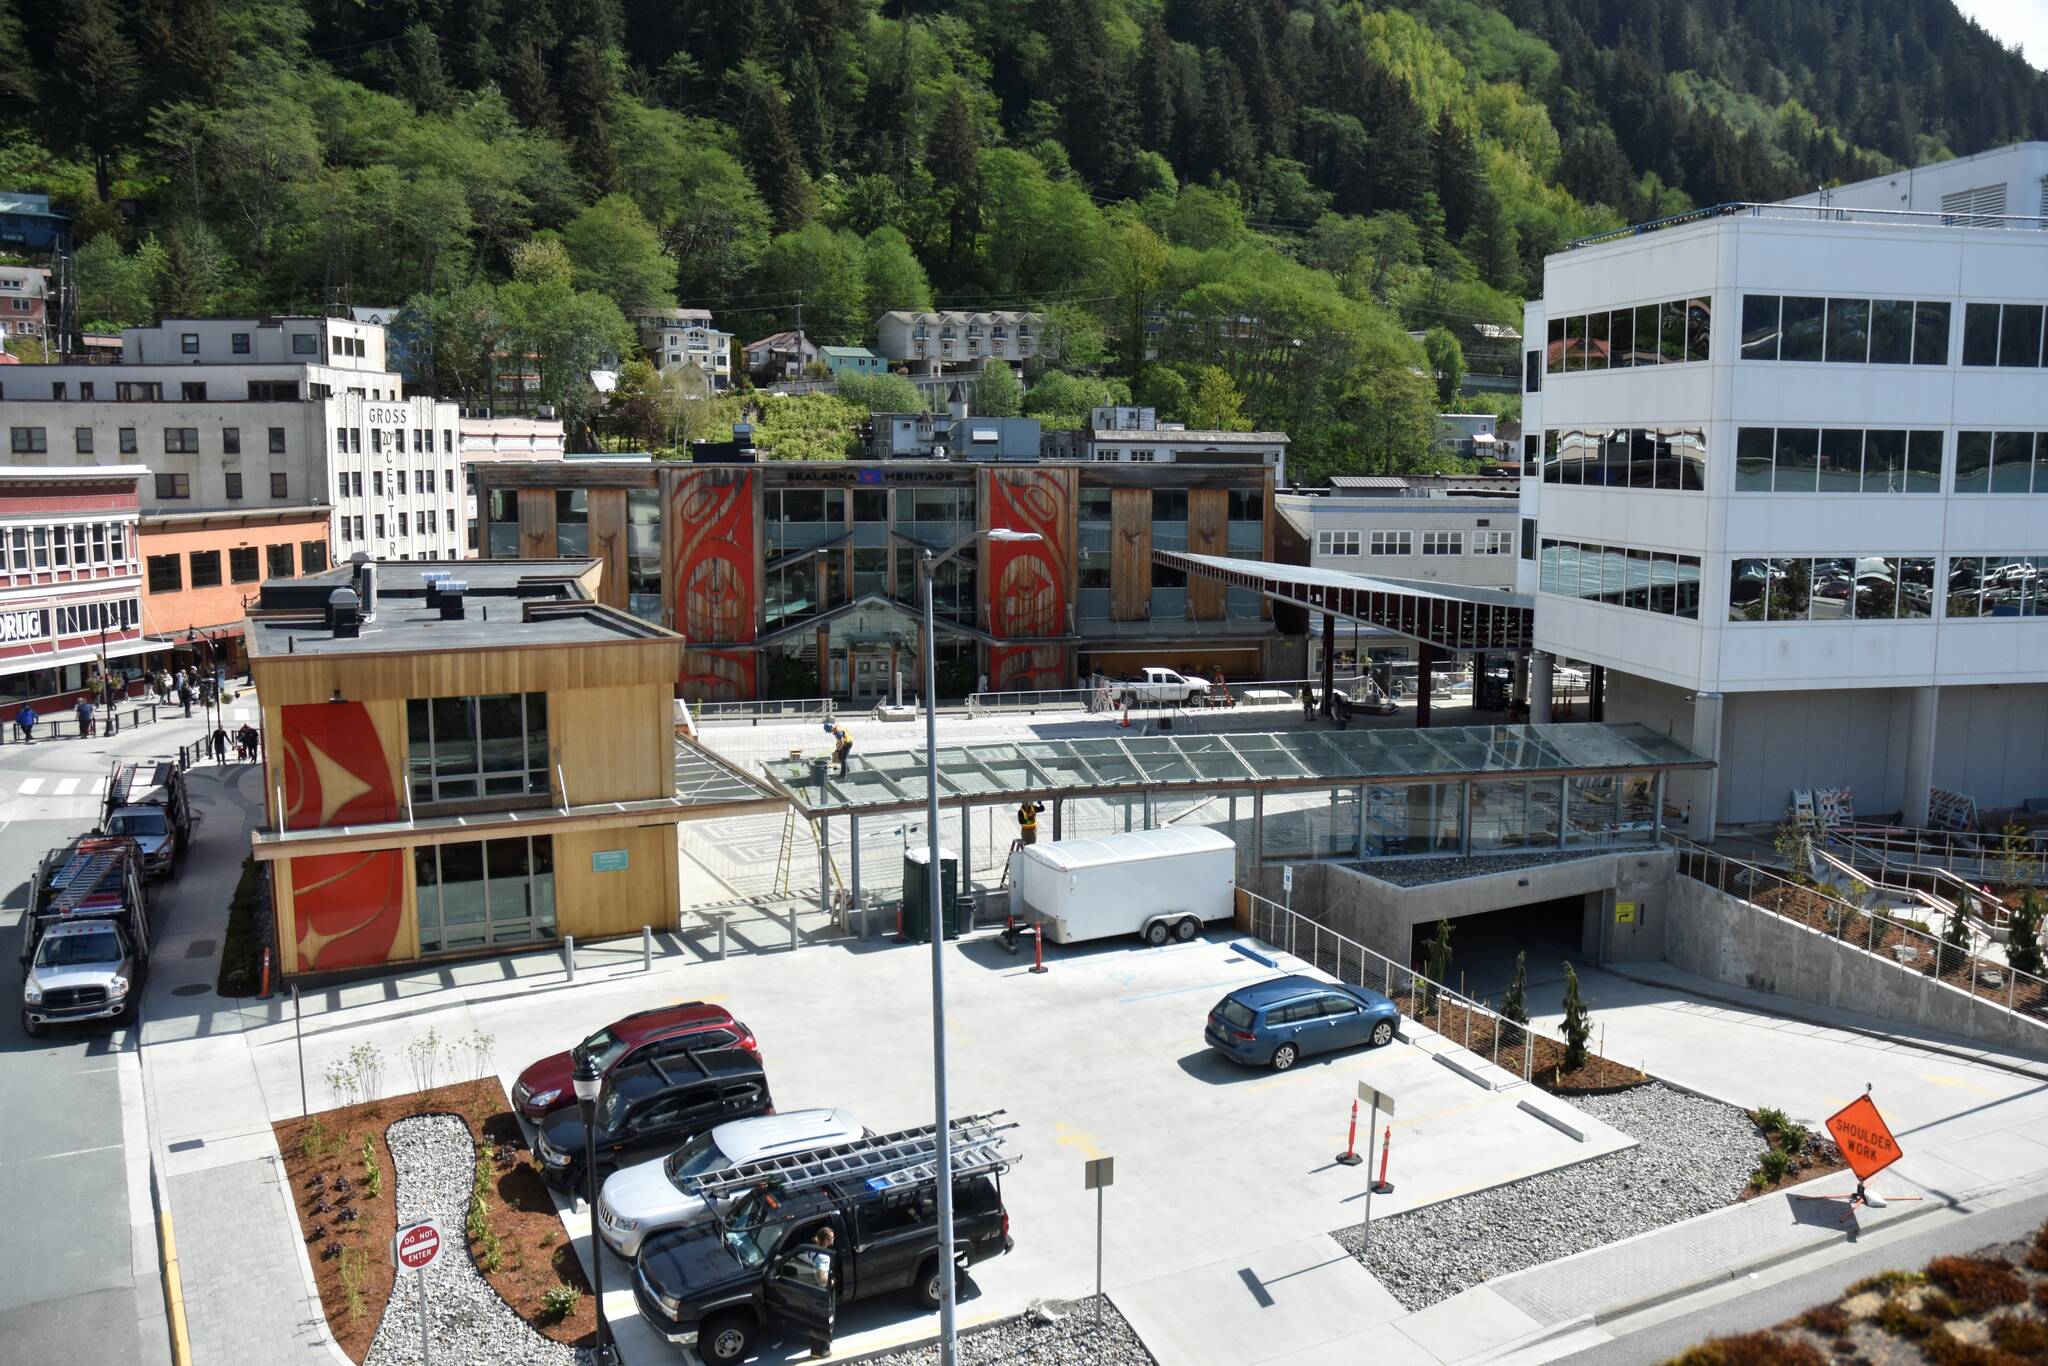 The Sealaska Heritage Institute's new arts campus was still under construction on Wednesday, May 25, 2022, but will officially open at noon this Wednesday for the start of Celebration, Sealaska's biennial festival. (Peter Segall / Juneau Empire)